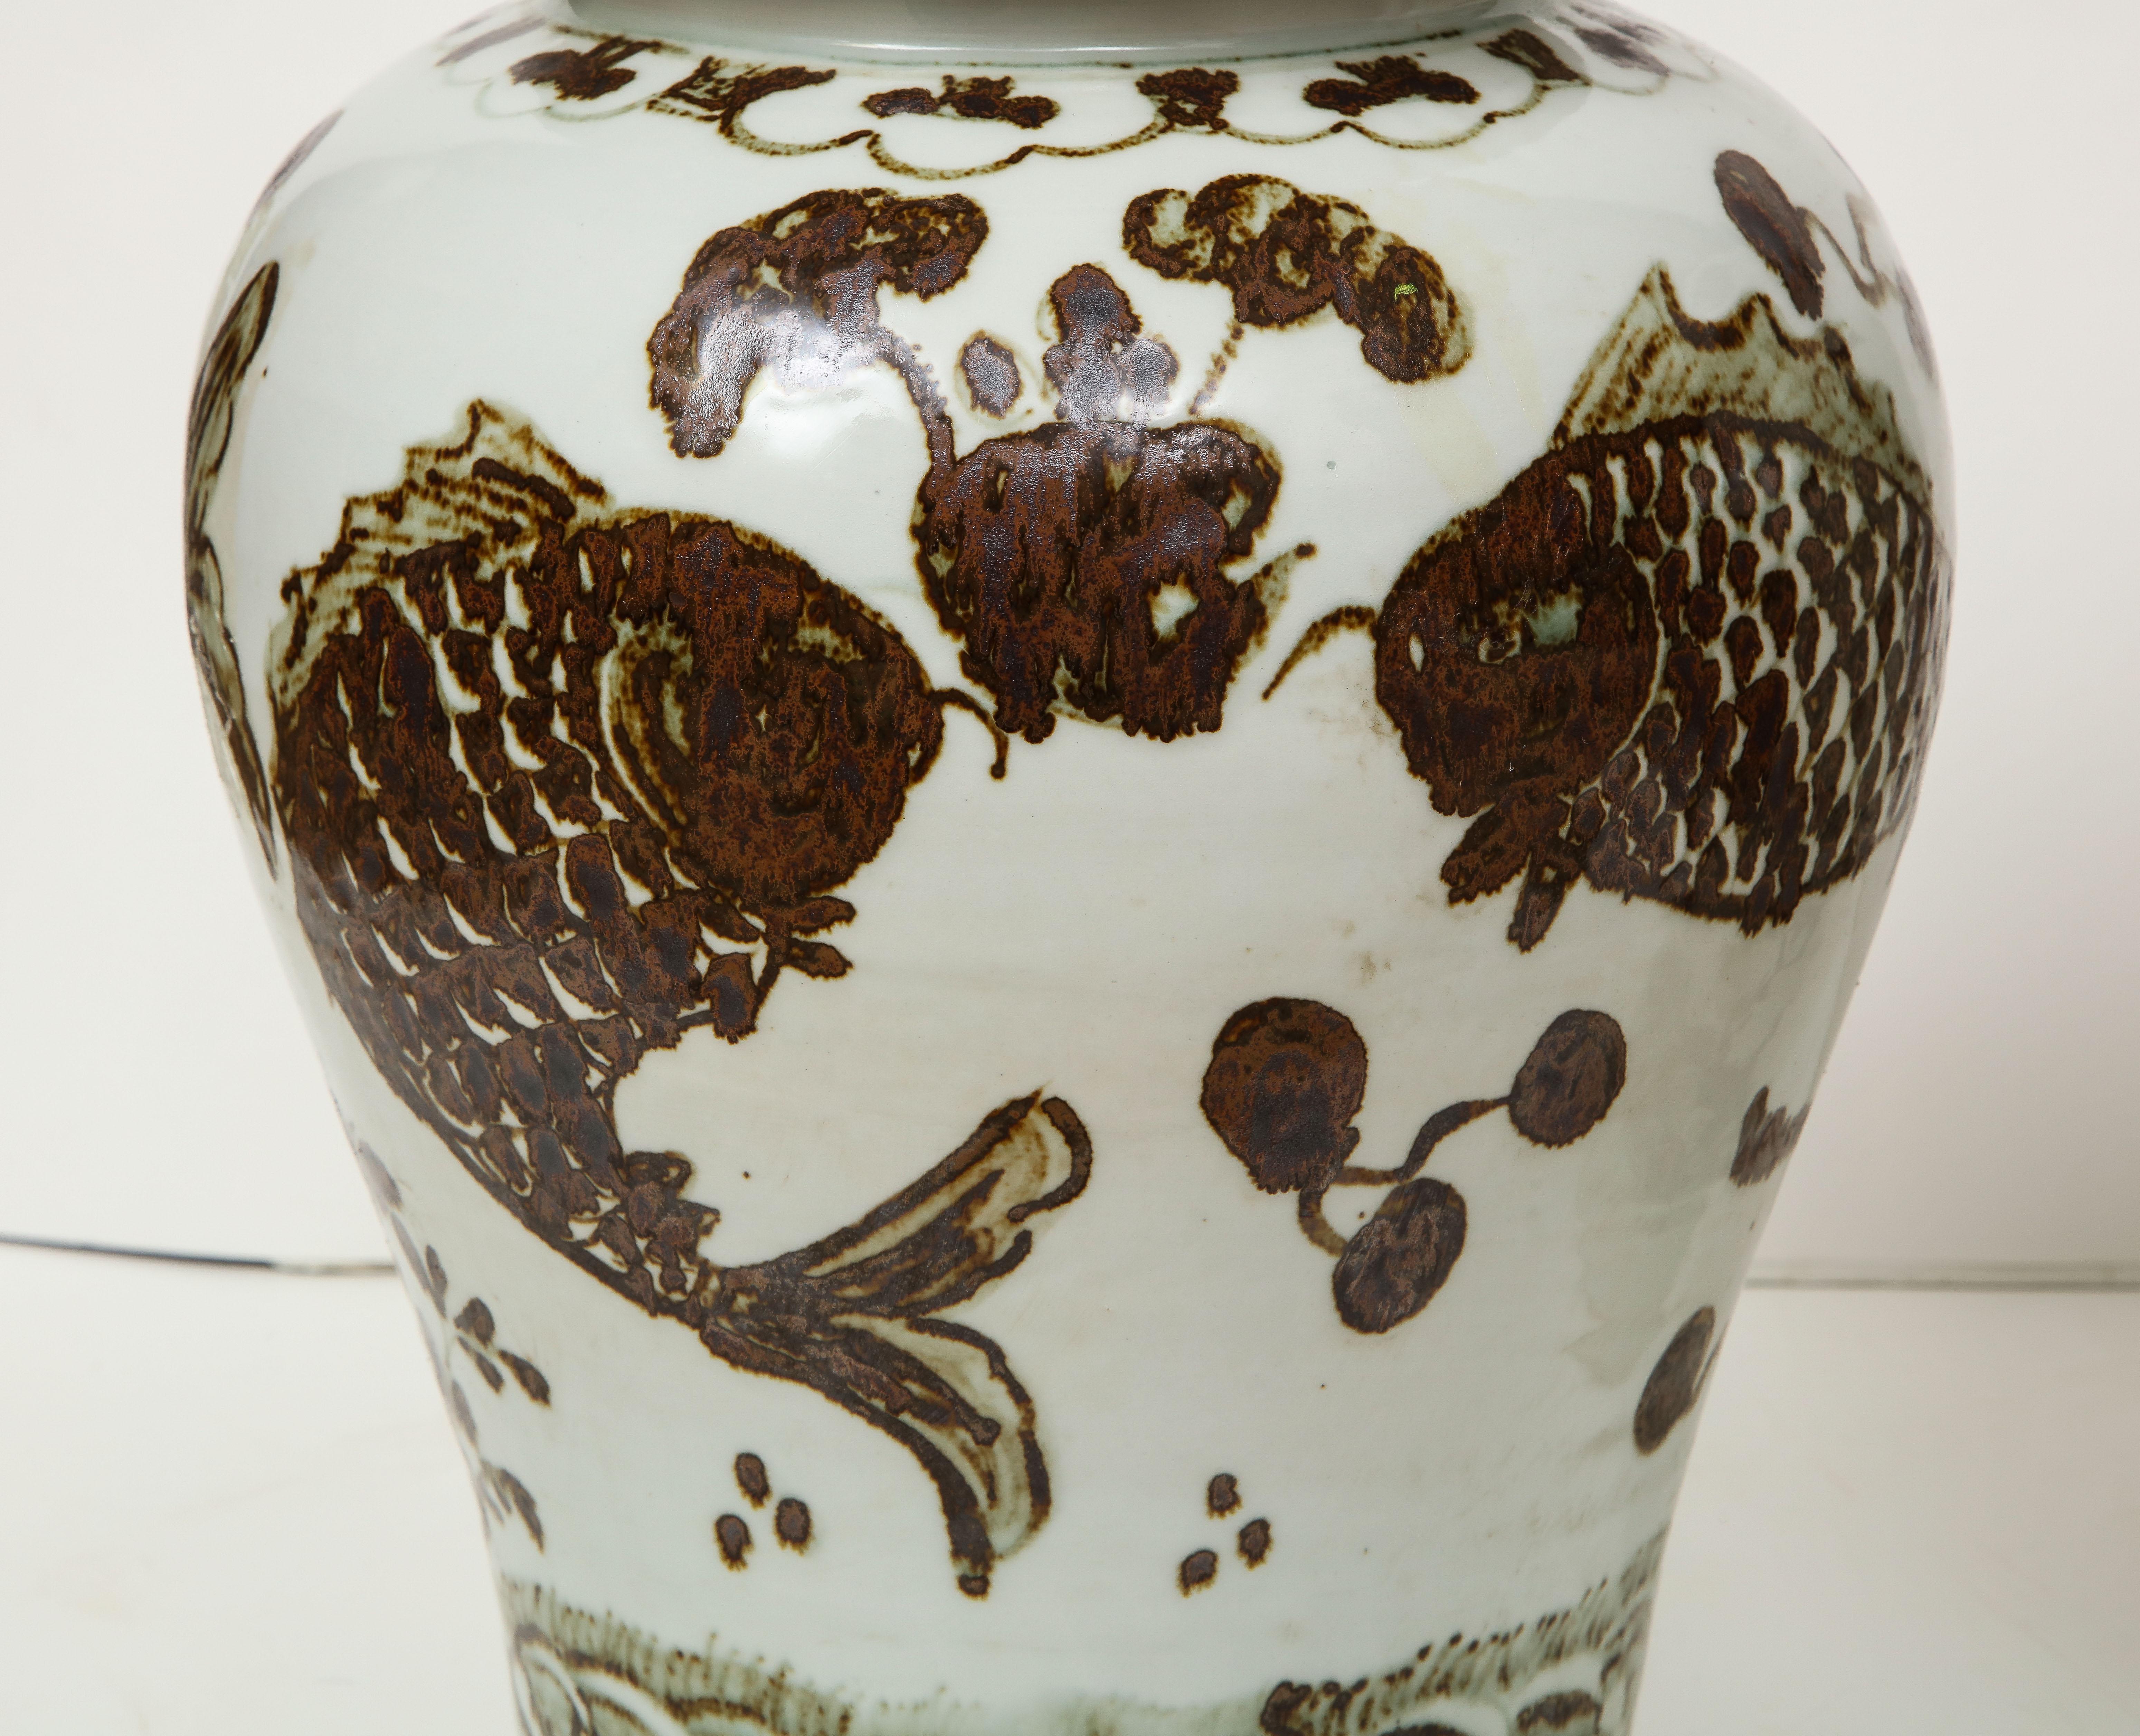 This pair of Chinese vases with lids can add the perfect finishing touch to a room, as the rich chocolate brown looks great with blues, greens, reds....everything. These vases would looks beautiful on a mantelpiece and they are sure to add that